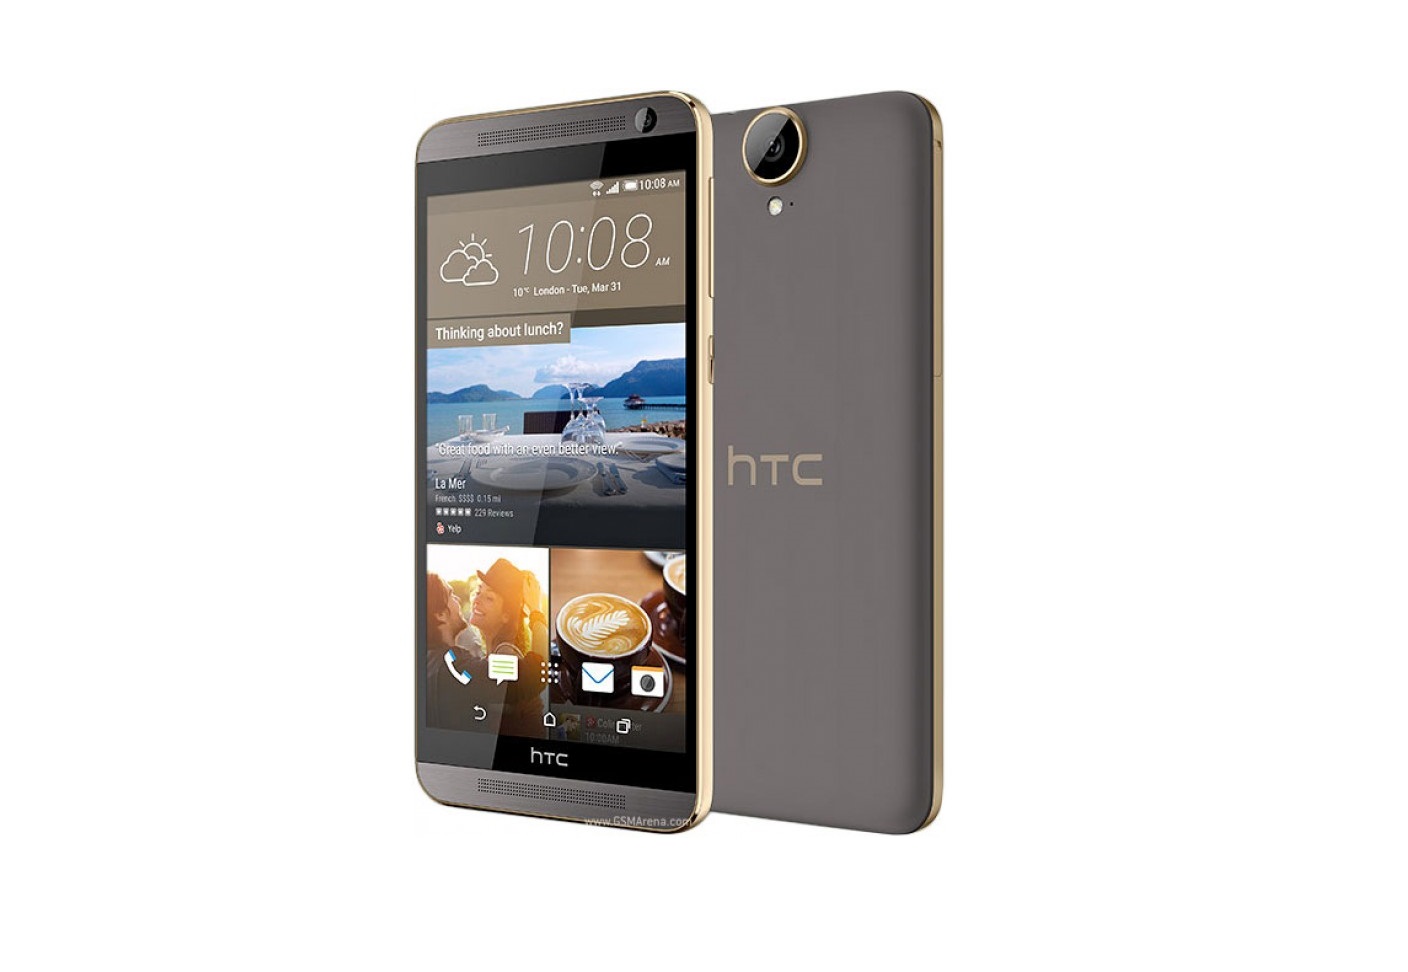 How to boot into safe mode on HTC One E9 Plus